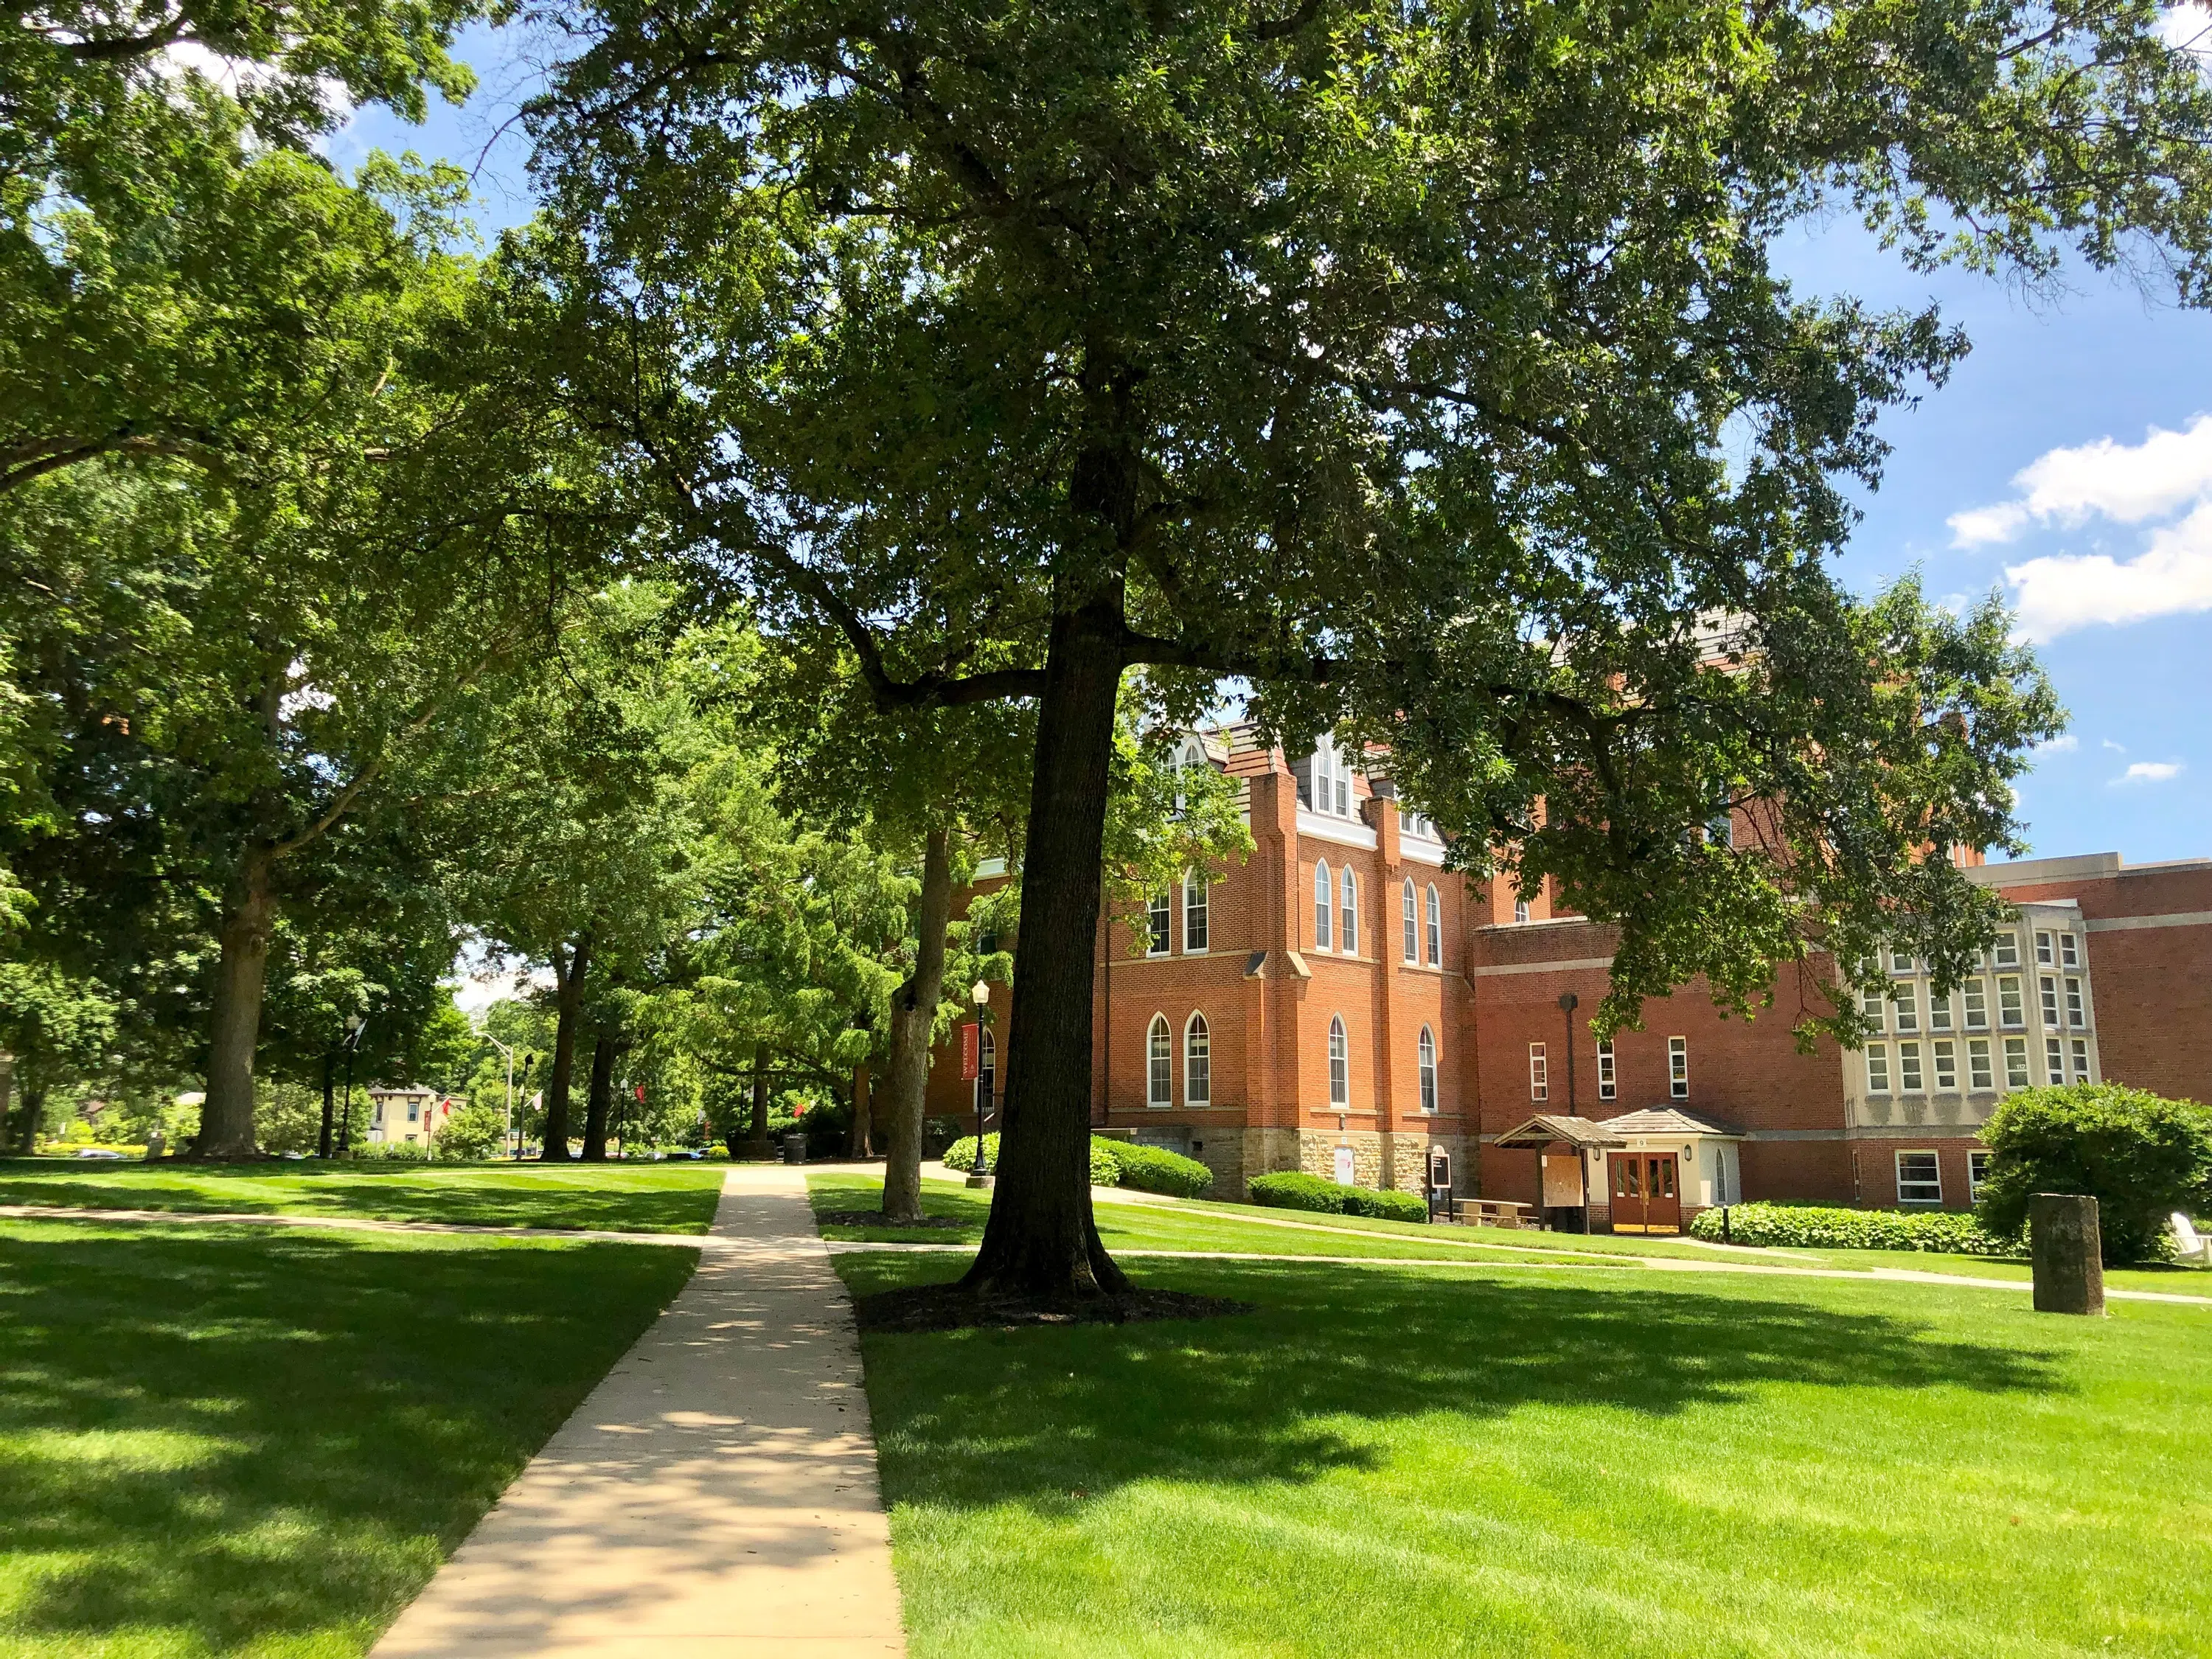 View of Towers Hall from the rear.